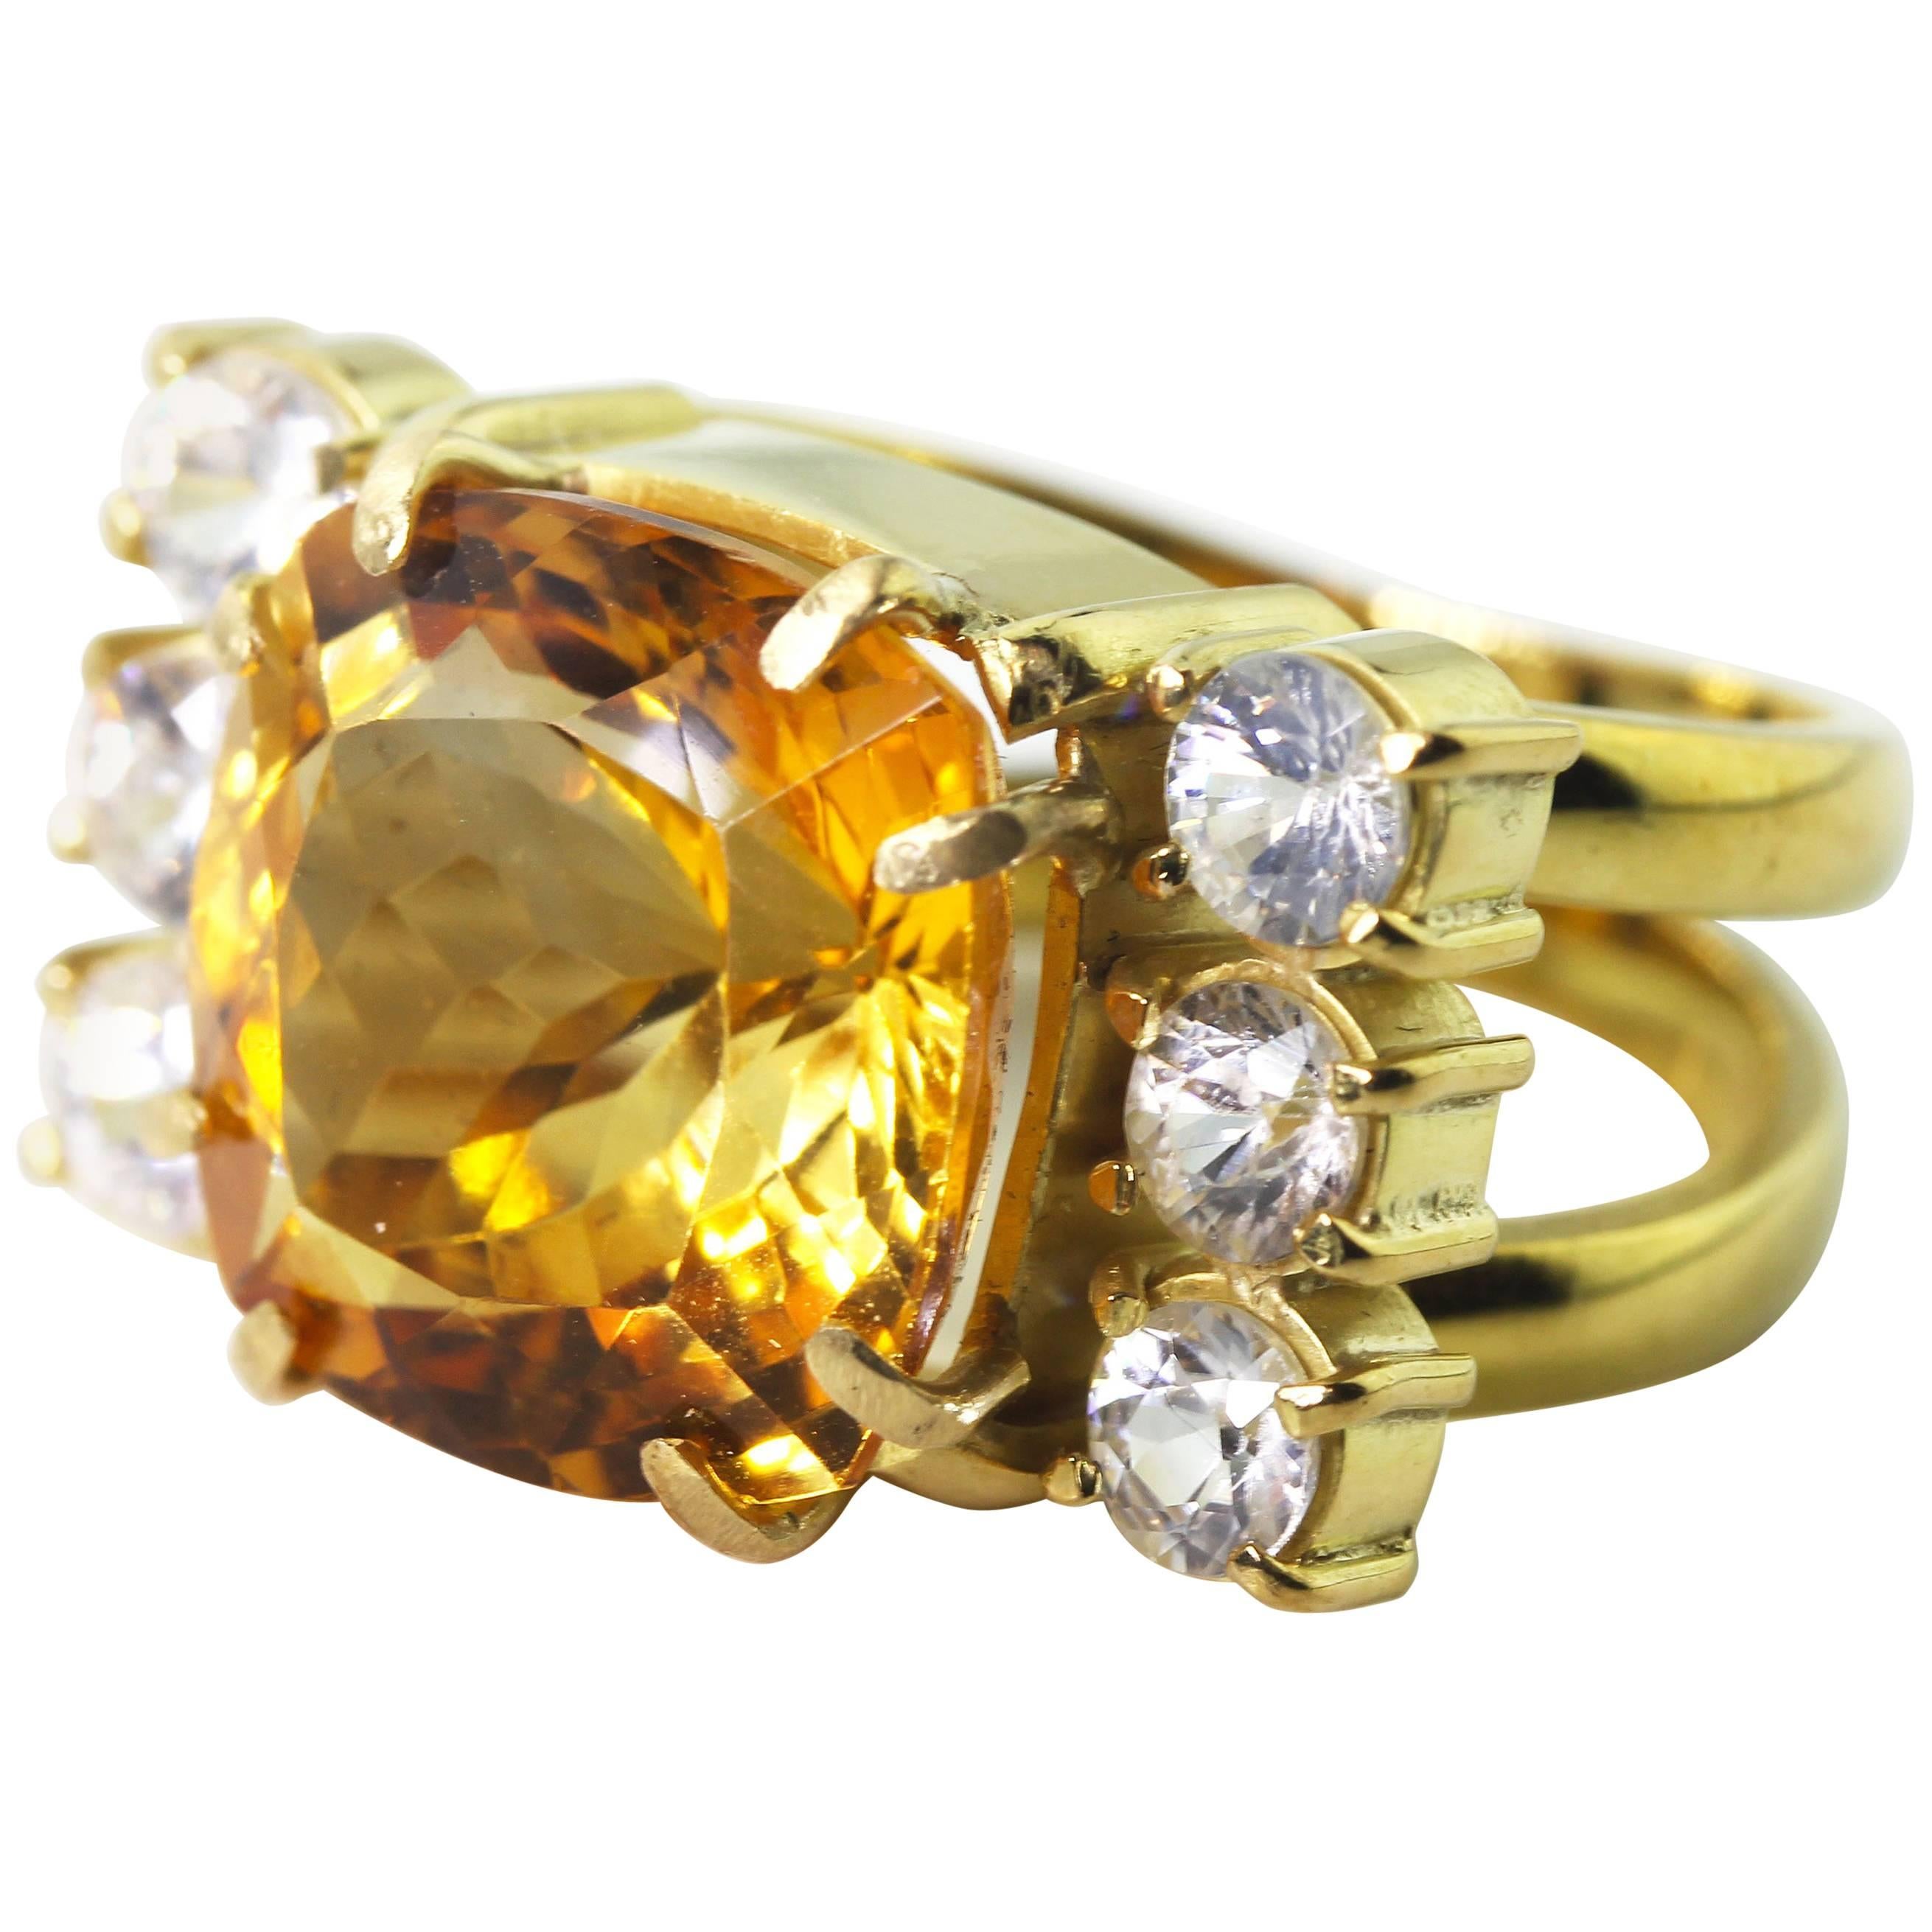 AJD Very Hollywood 11.5 Carat Golden Citrine & Sapphire 18Kt Gold Cocktail Ring